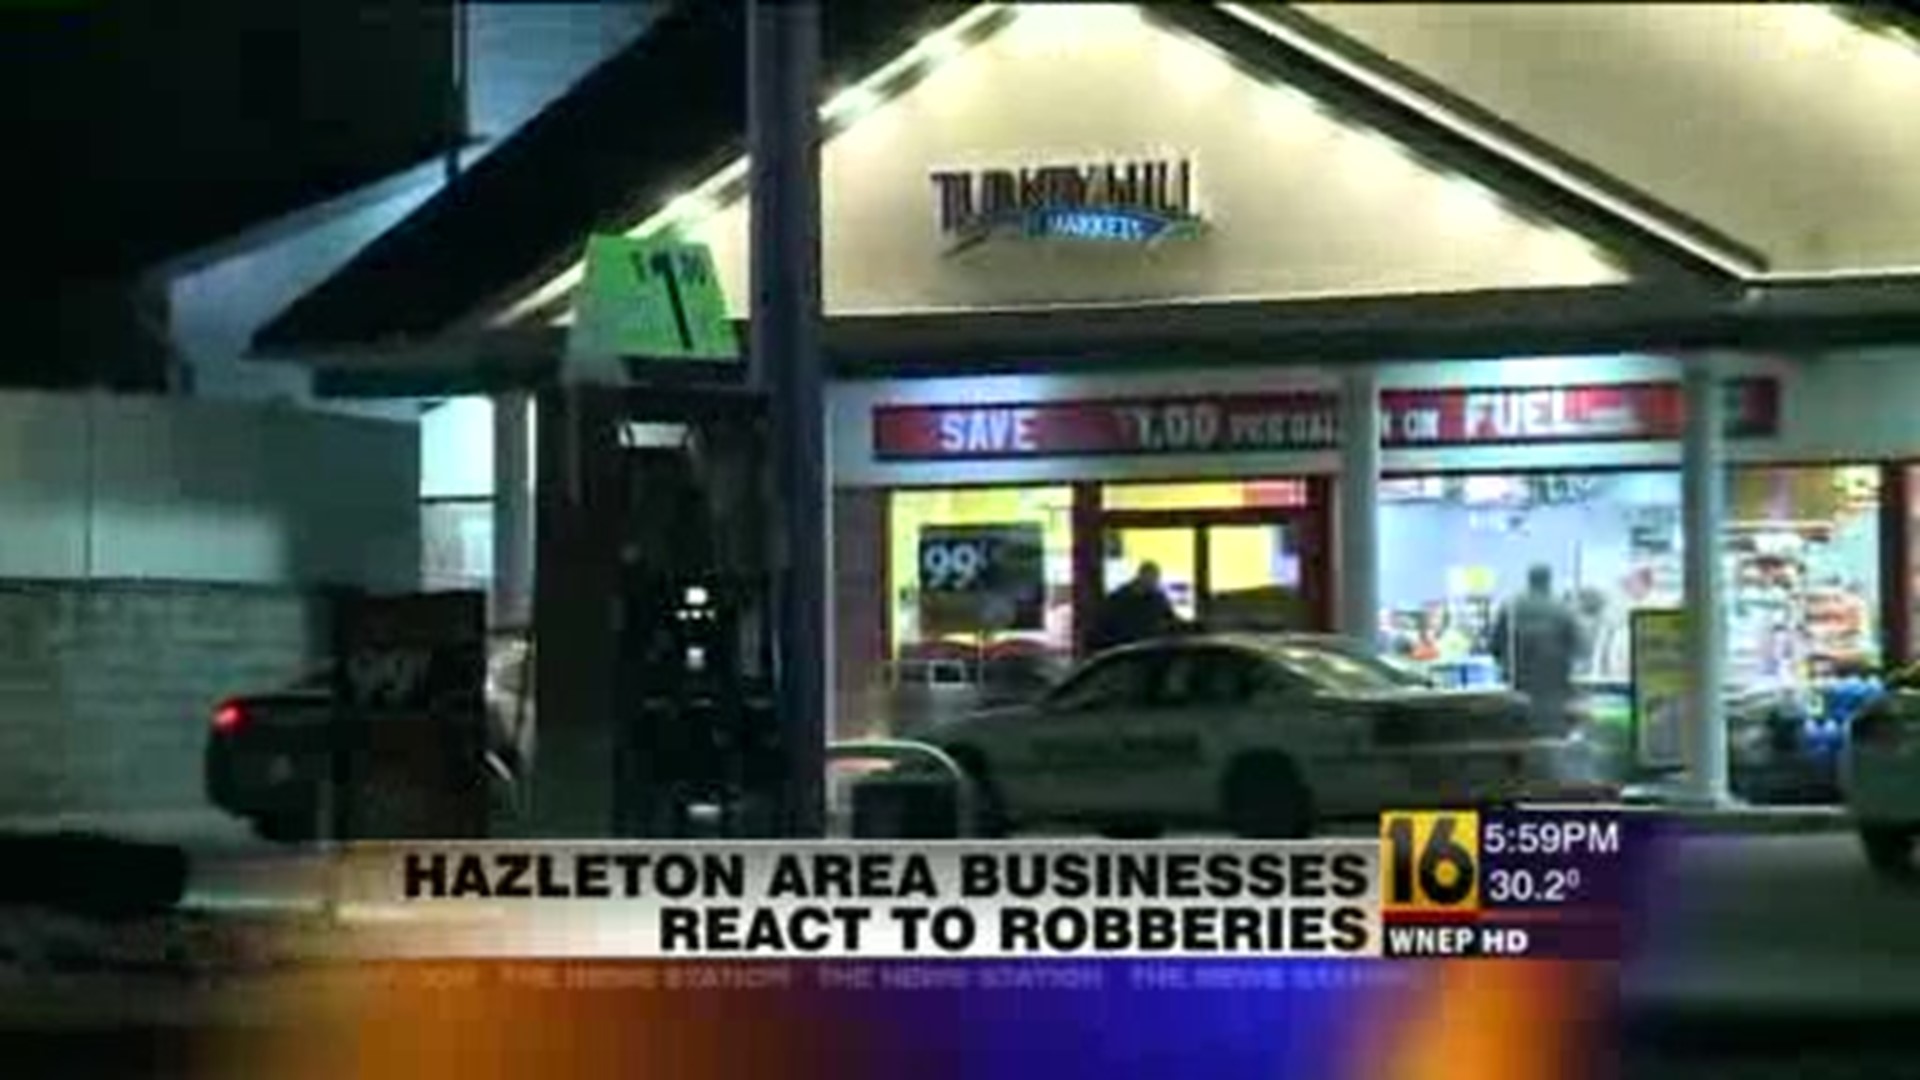 Business Owners Increase Security after Robberies